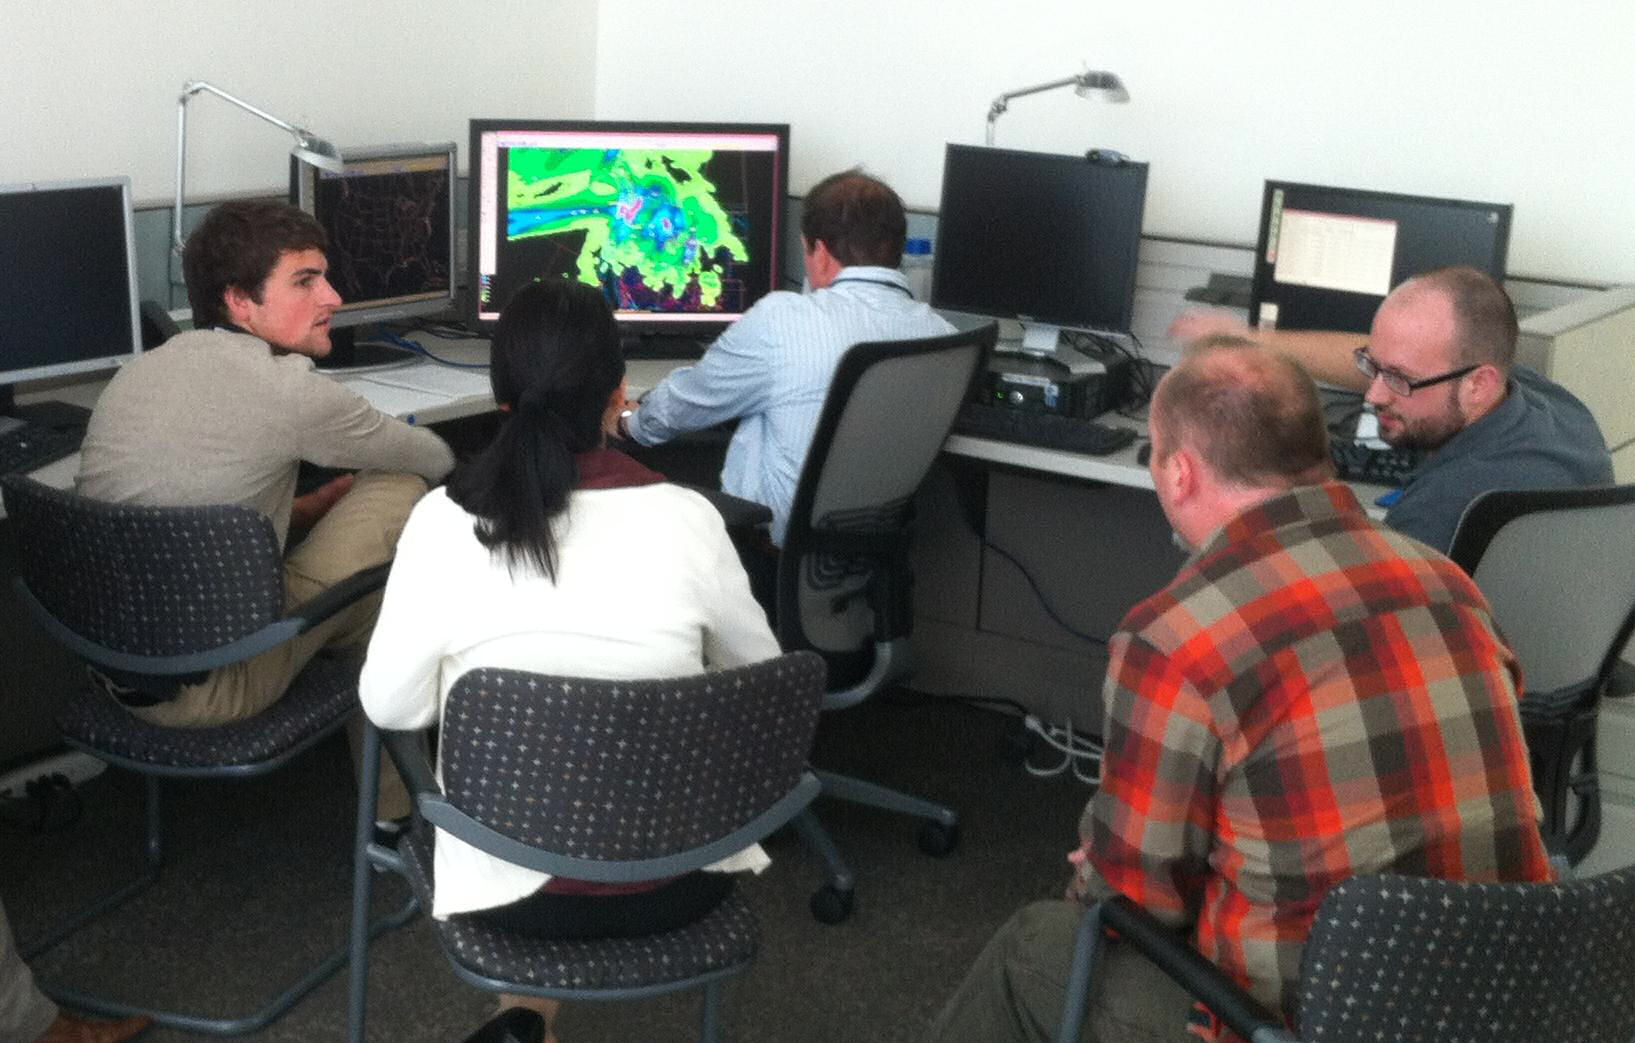 ARRFEX participants discuss the numerical models before making their forecast. (Photo credit: Dave Novak, HPC). From left to right: Ben Moore (ESRL), Yan Luo (EMC), Kenny James (HPC), Victor Stegemiller (NWRFC), and Jon Rutz (Univ. Utah).